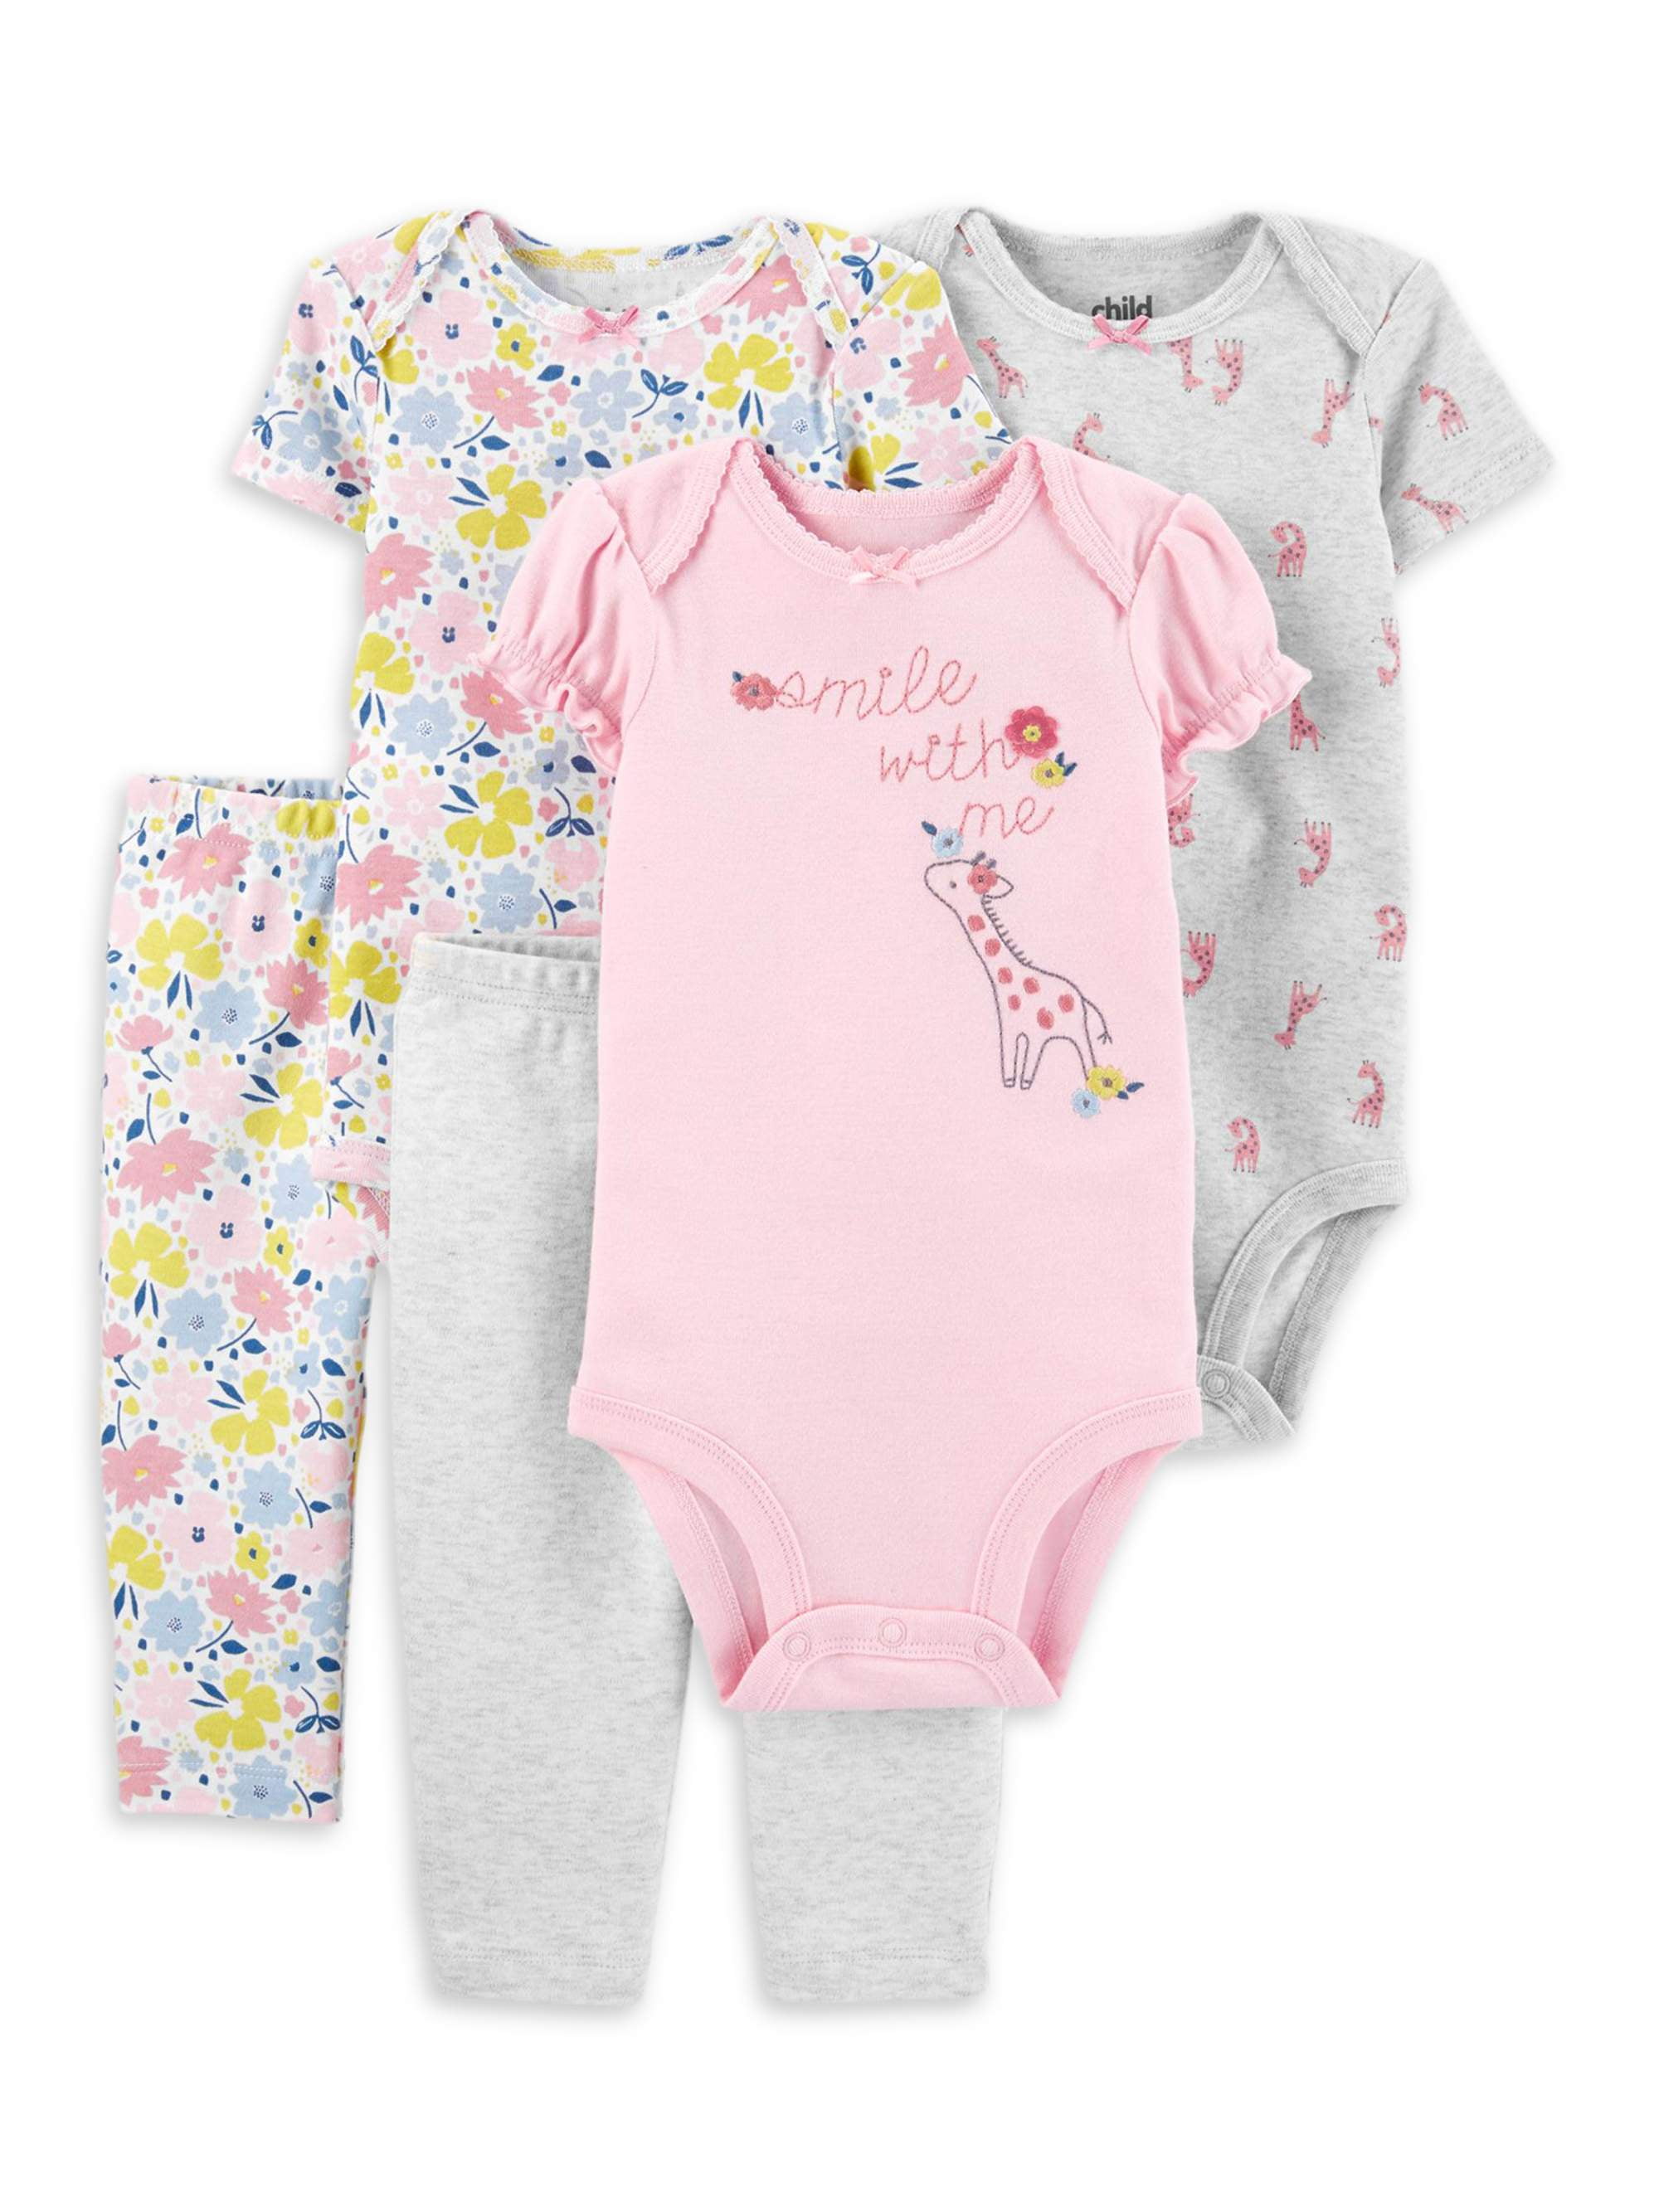 Precious first 2PC Preemie girl with Pink hearts short sleeve bodysuit set. 